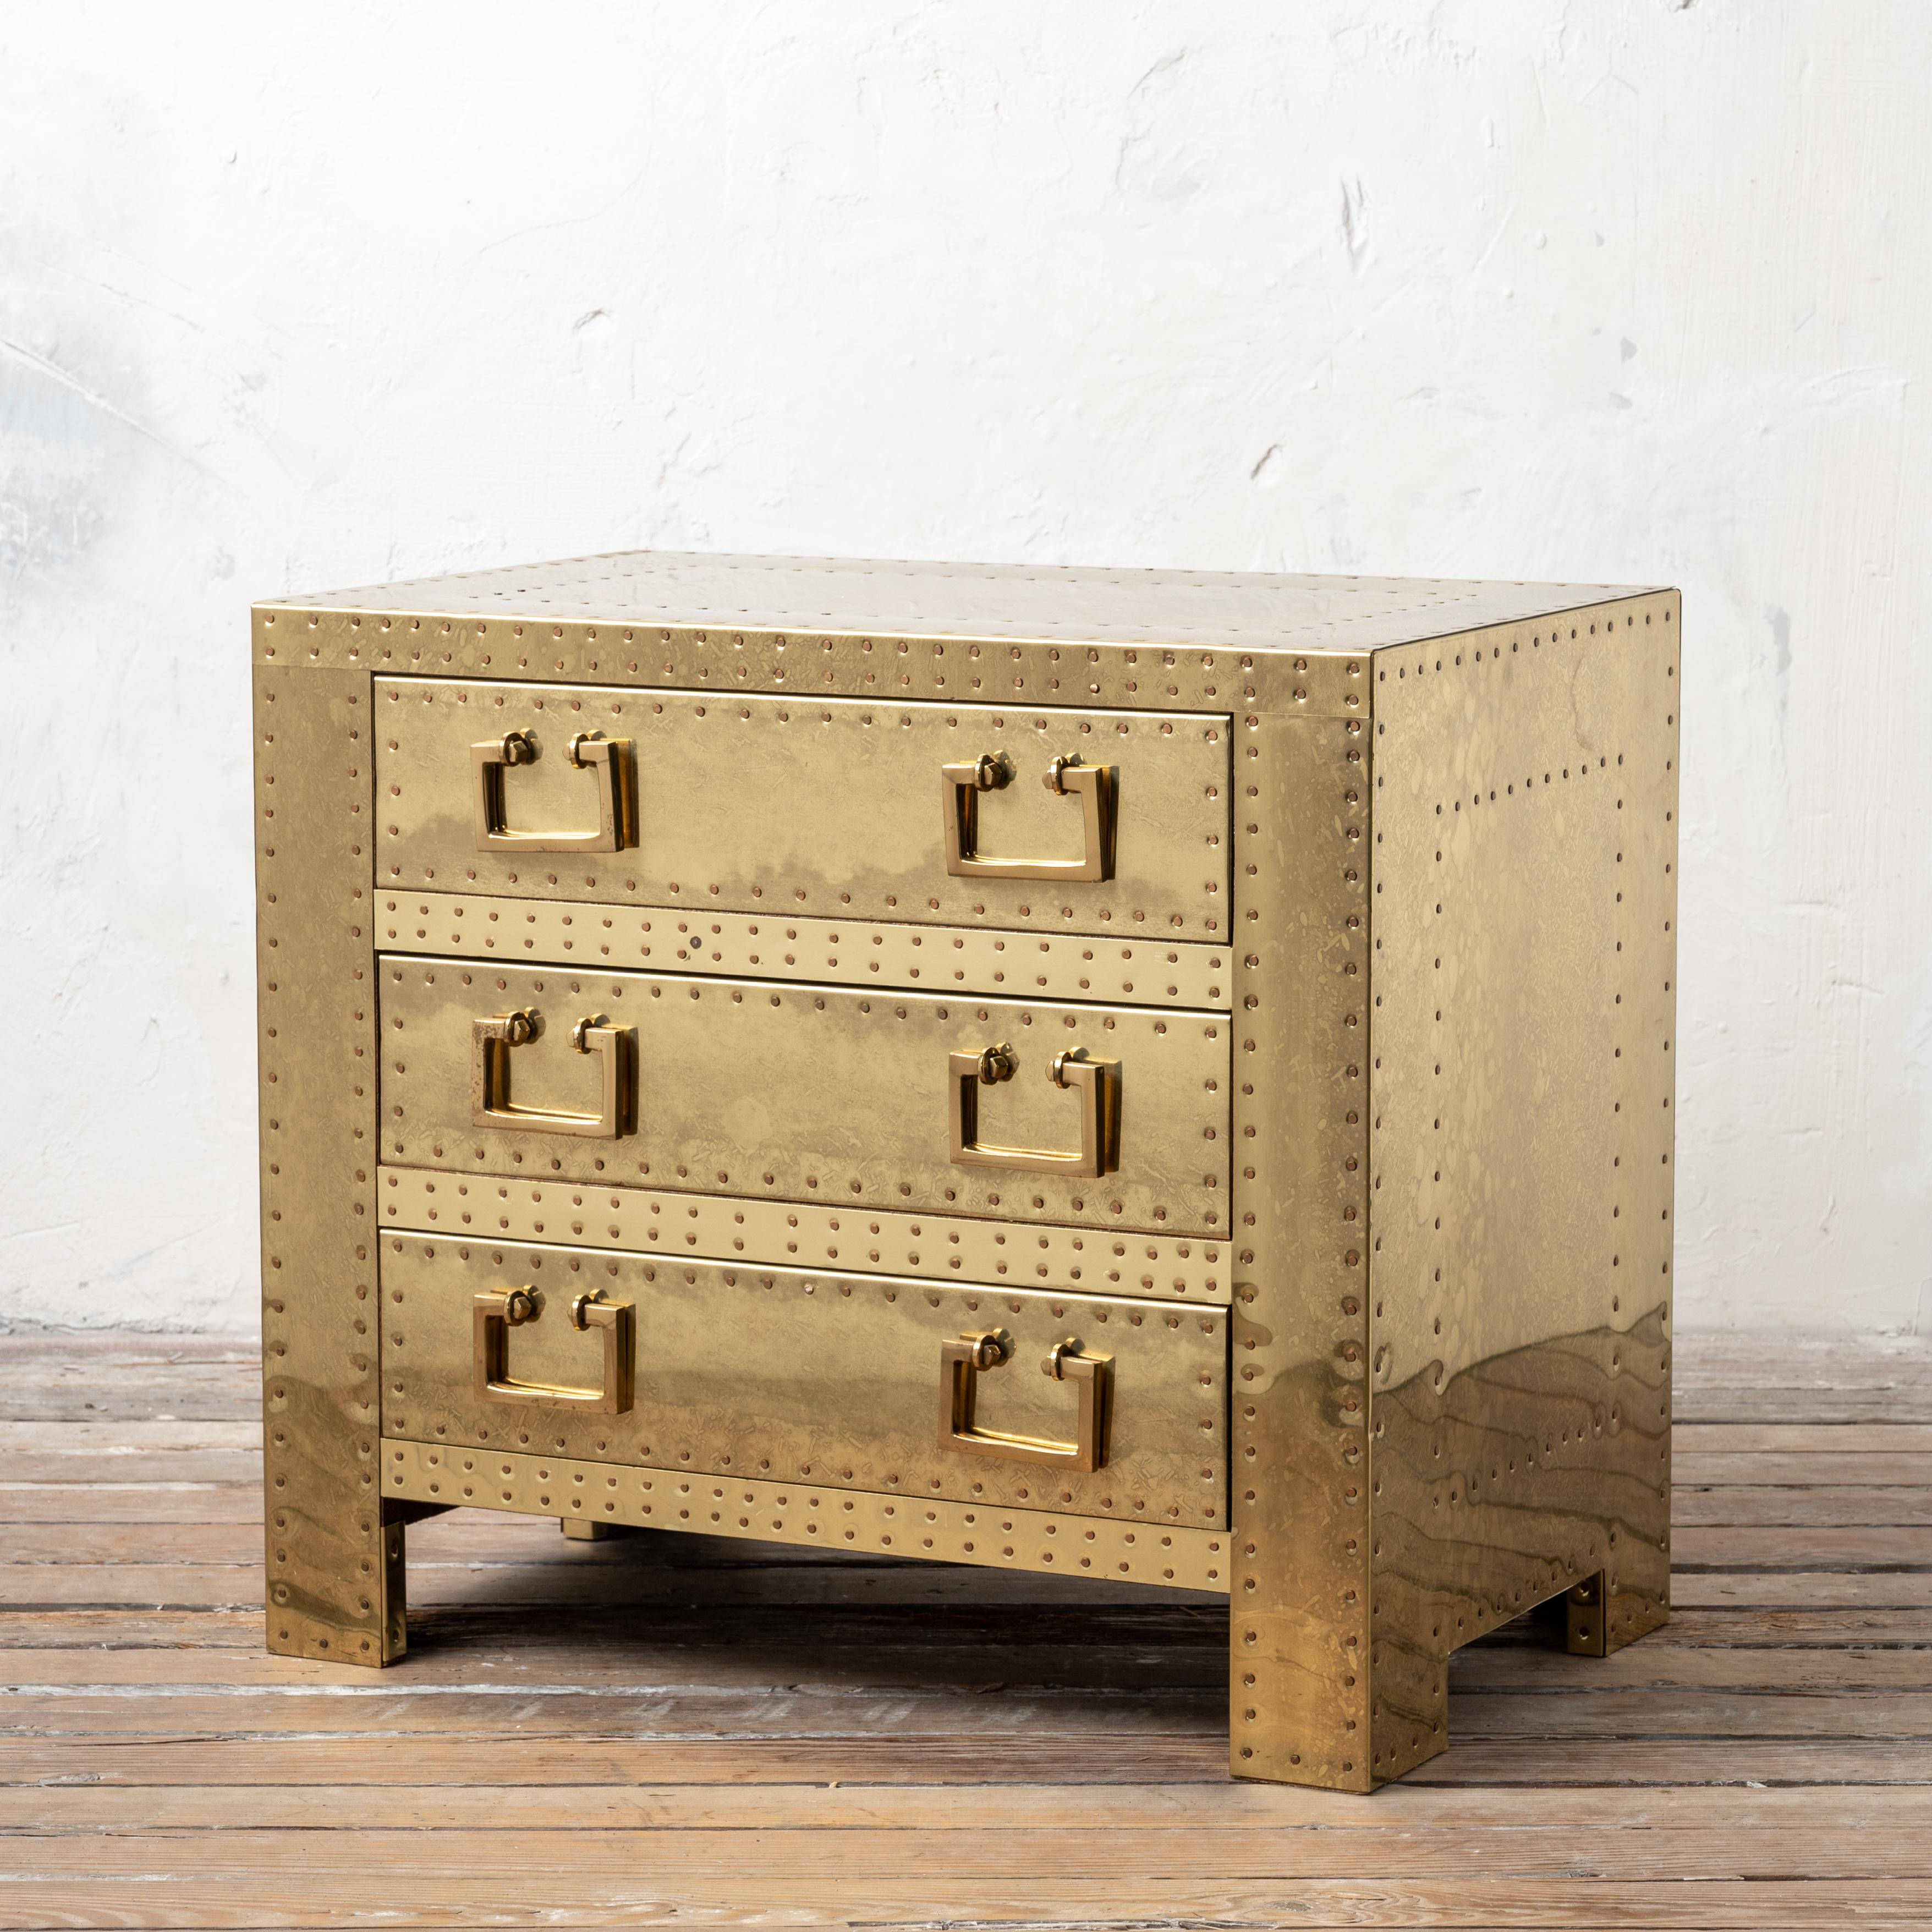 A Sarreid brass three drawer side chest, 1970s.

24 inches wide by 15 ½ inches deep by 21 ¼ inches
